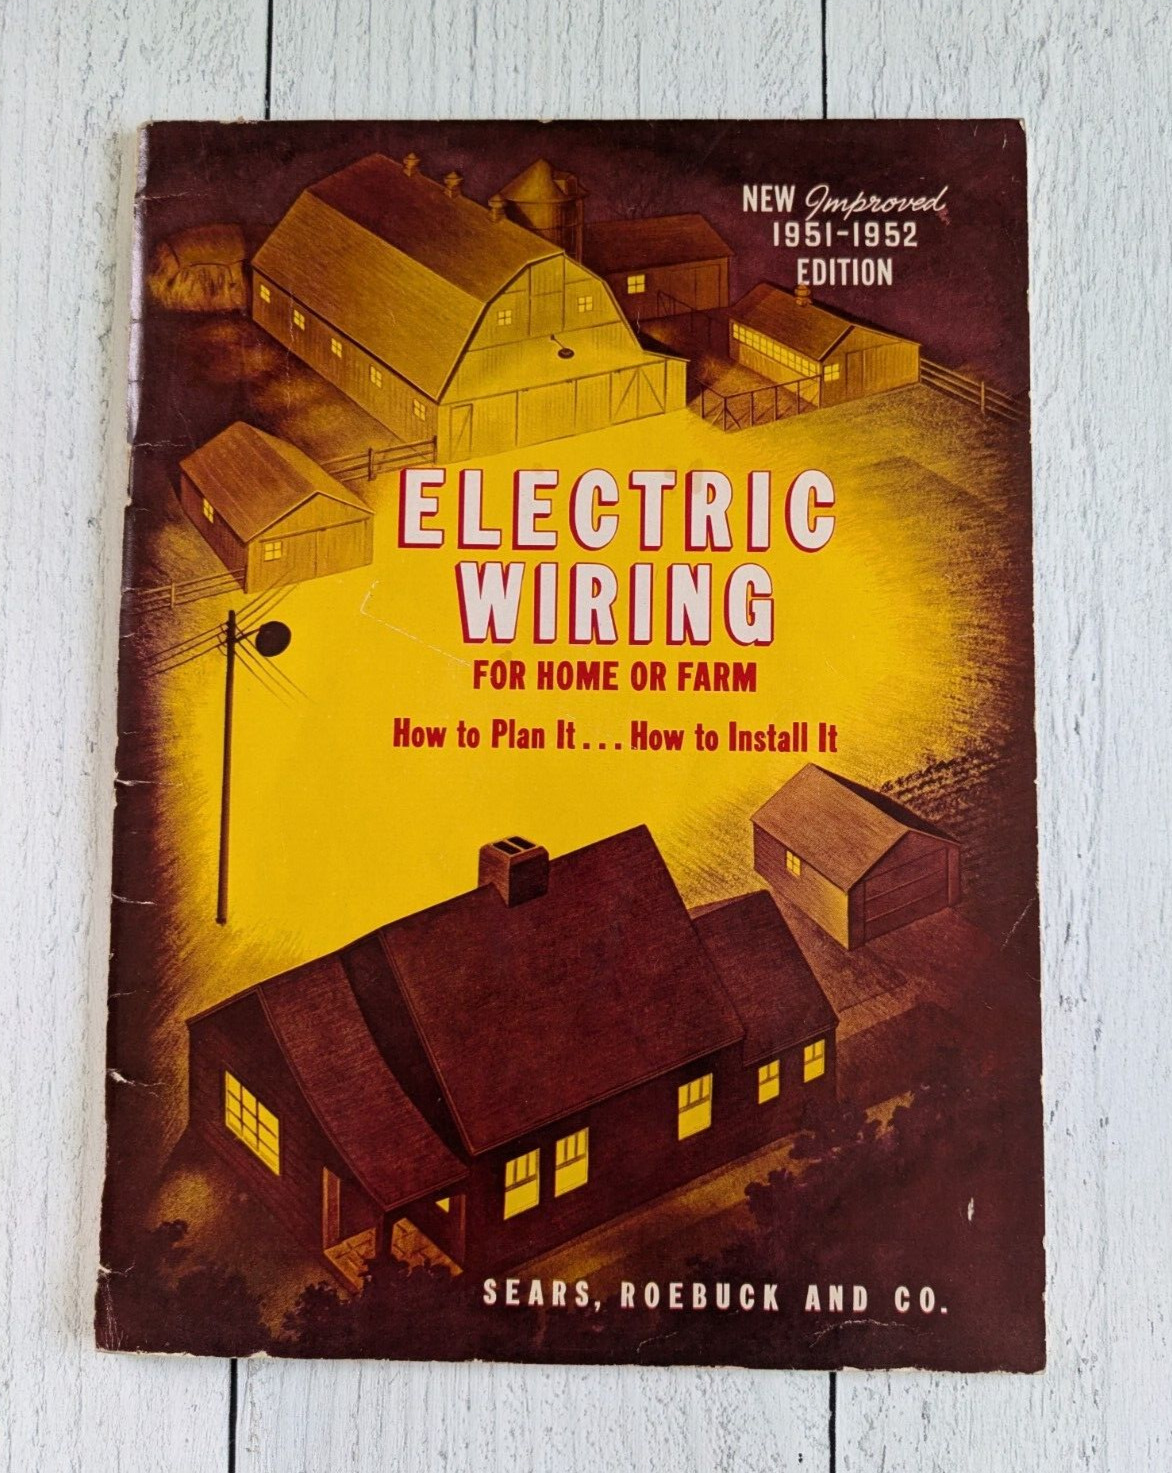 Sears, Roebuck and Co. Electrical Wiring for Home or Farm ( PB, 1951-1952 )